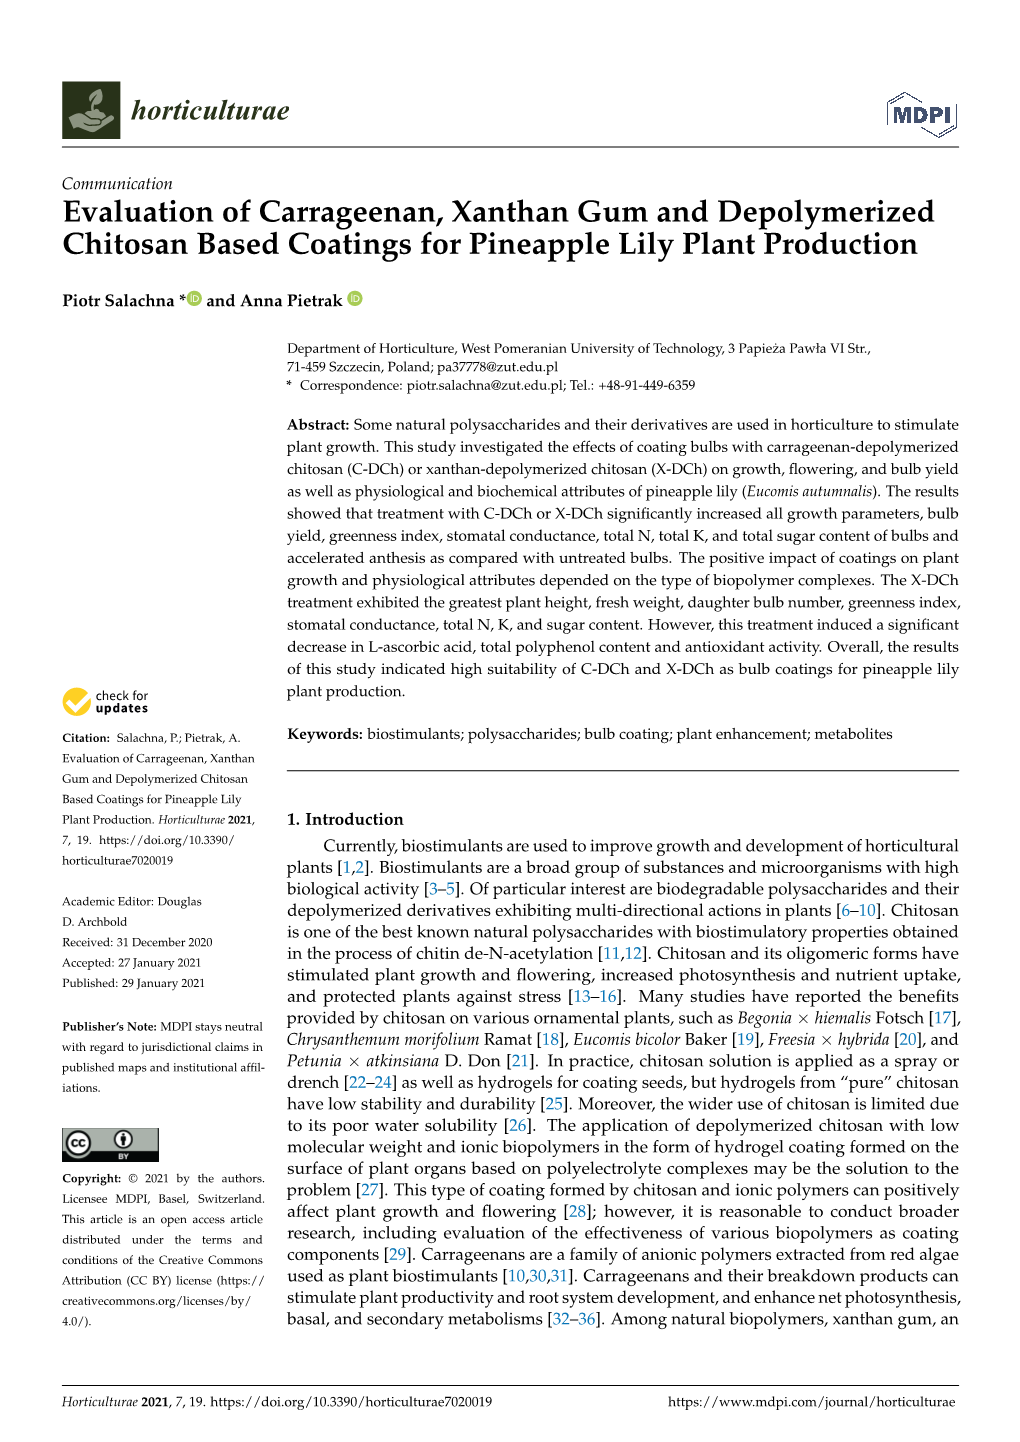 Evaluation of Carrageenan, Xanthan Gum and Depolymerized Chitosan Based Coatings for Pineapple Lily Plant Production